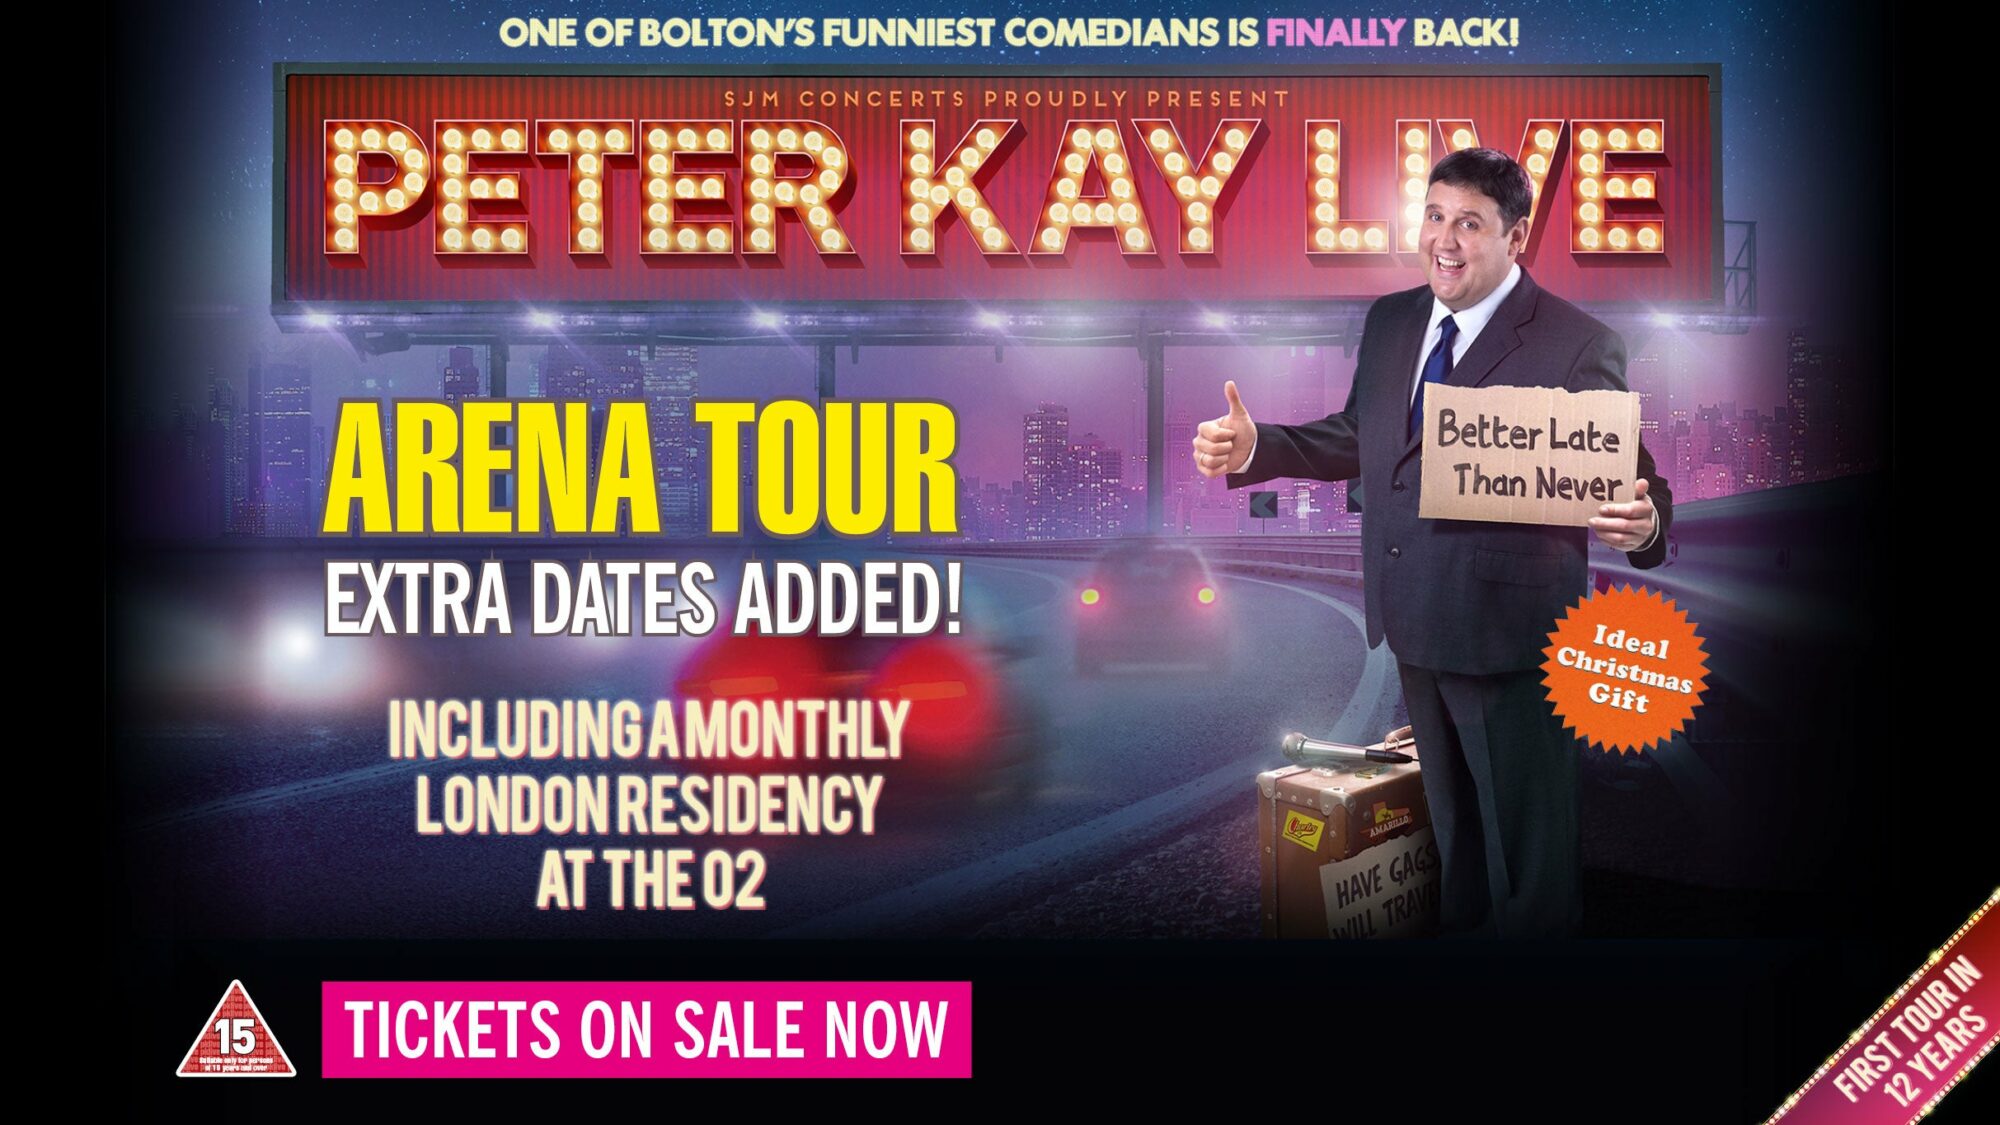 Image name Peter Kay the Gallery at First Direct Arena Leeds the 1 image from the post Peter Kay is coming to Yorkshire in Yorkshire.com.